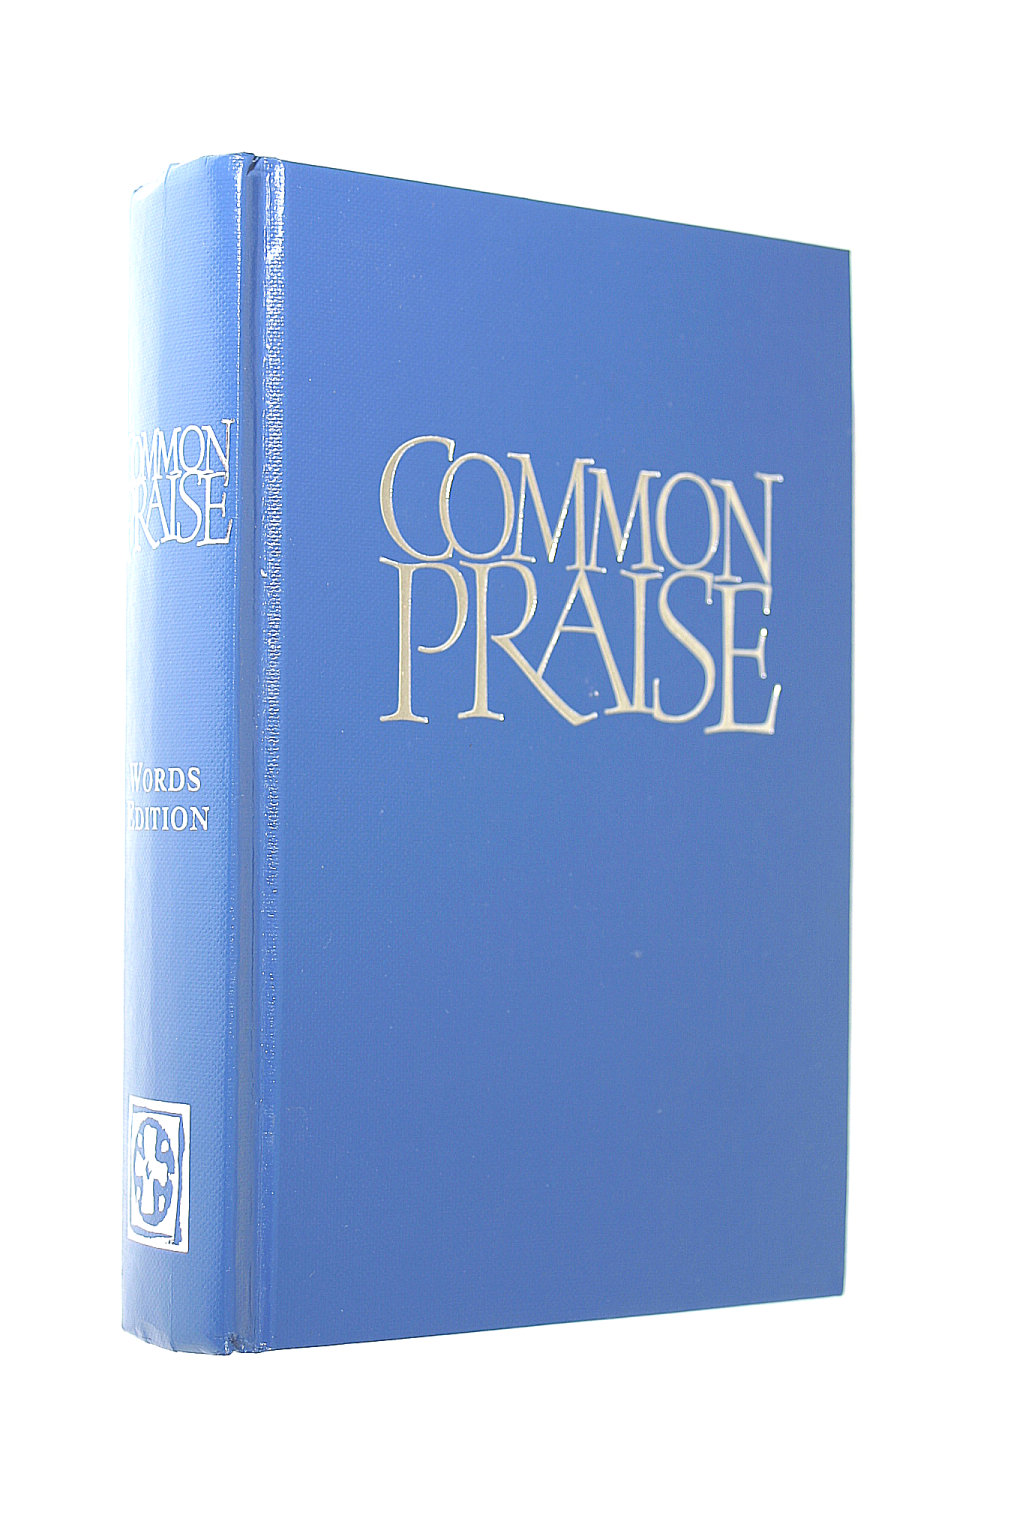 HYMNS ANCIENT AND MODERN - Common Praise Words edition: 45